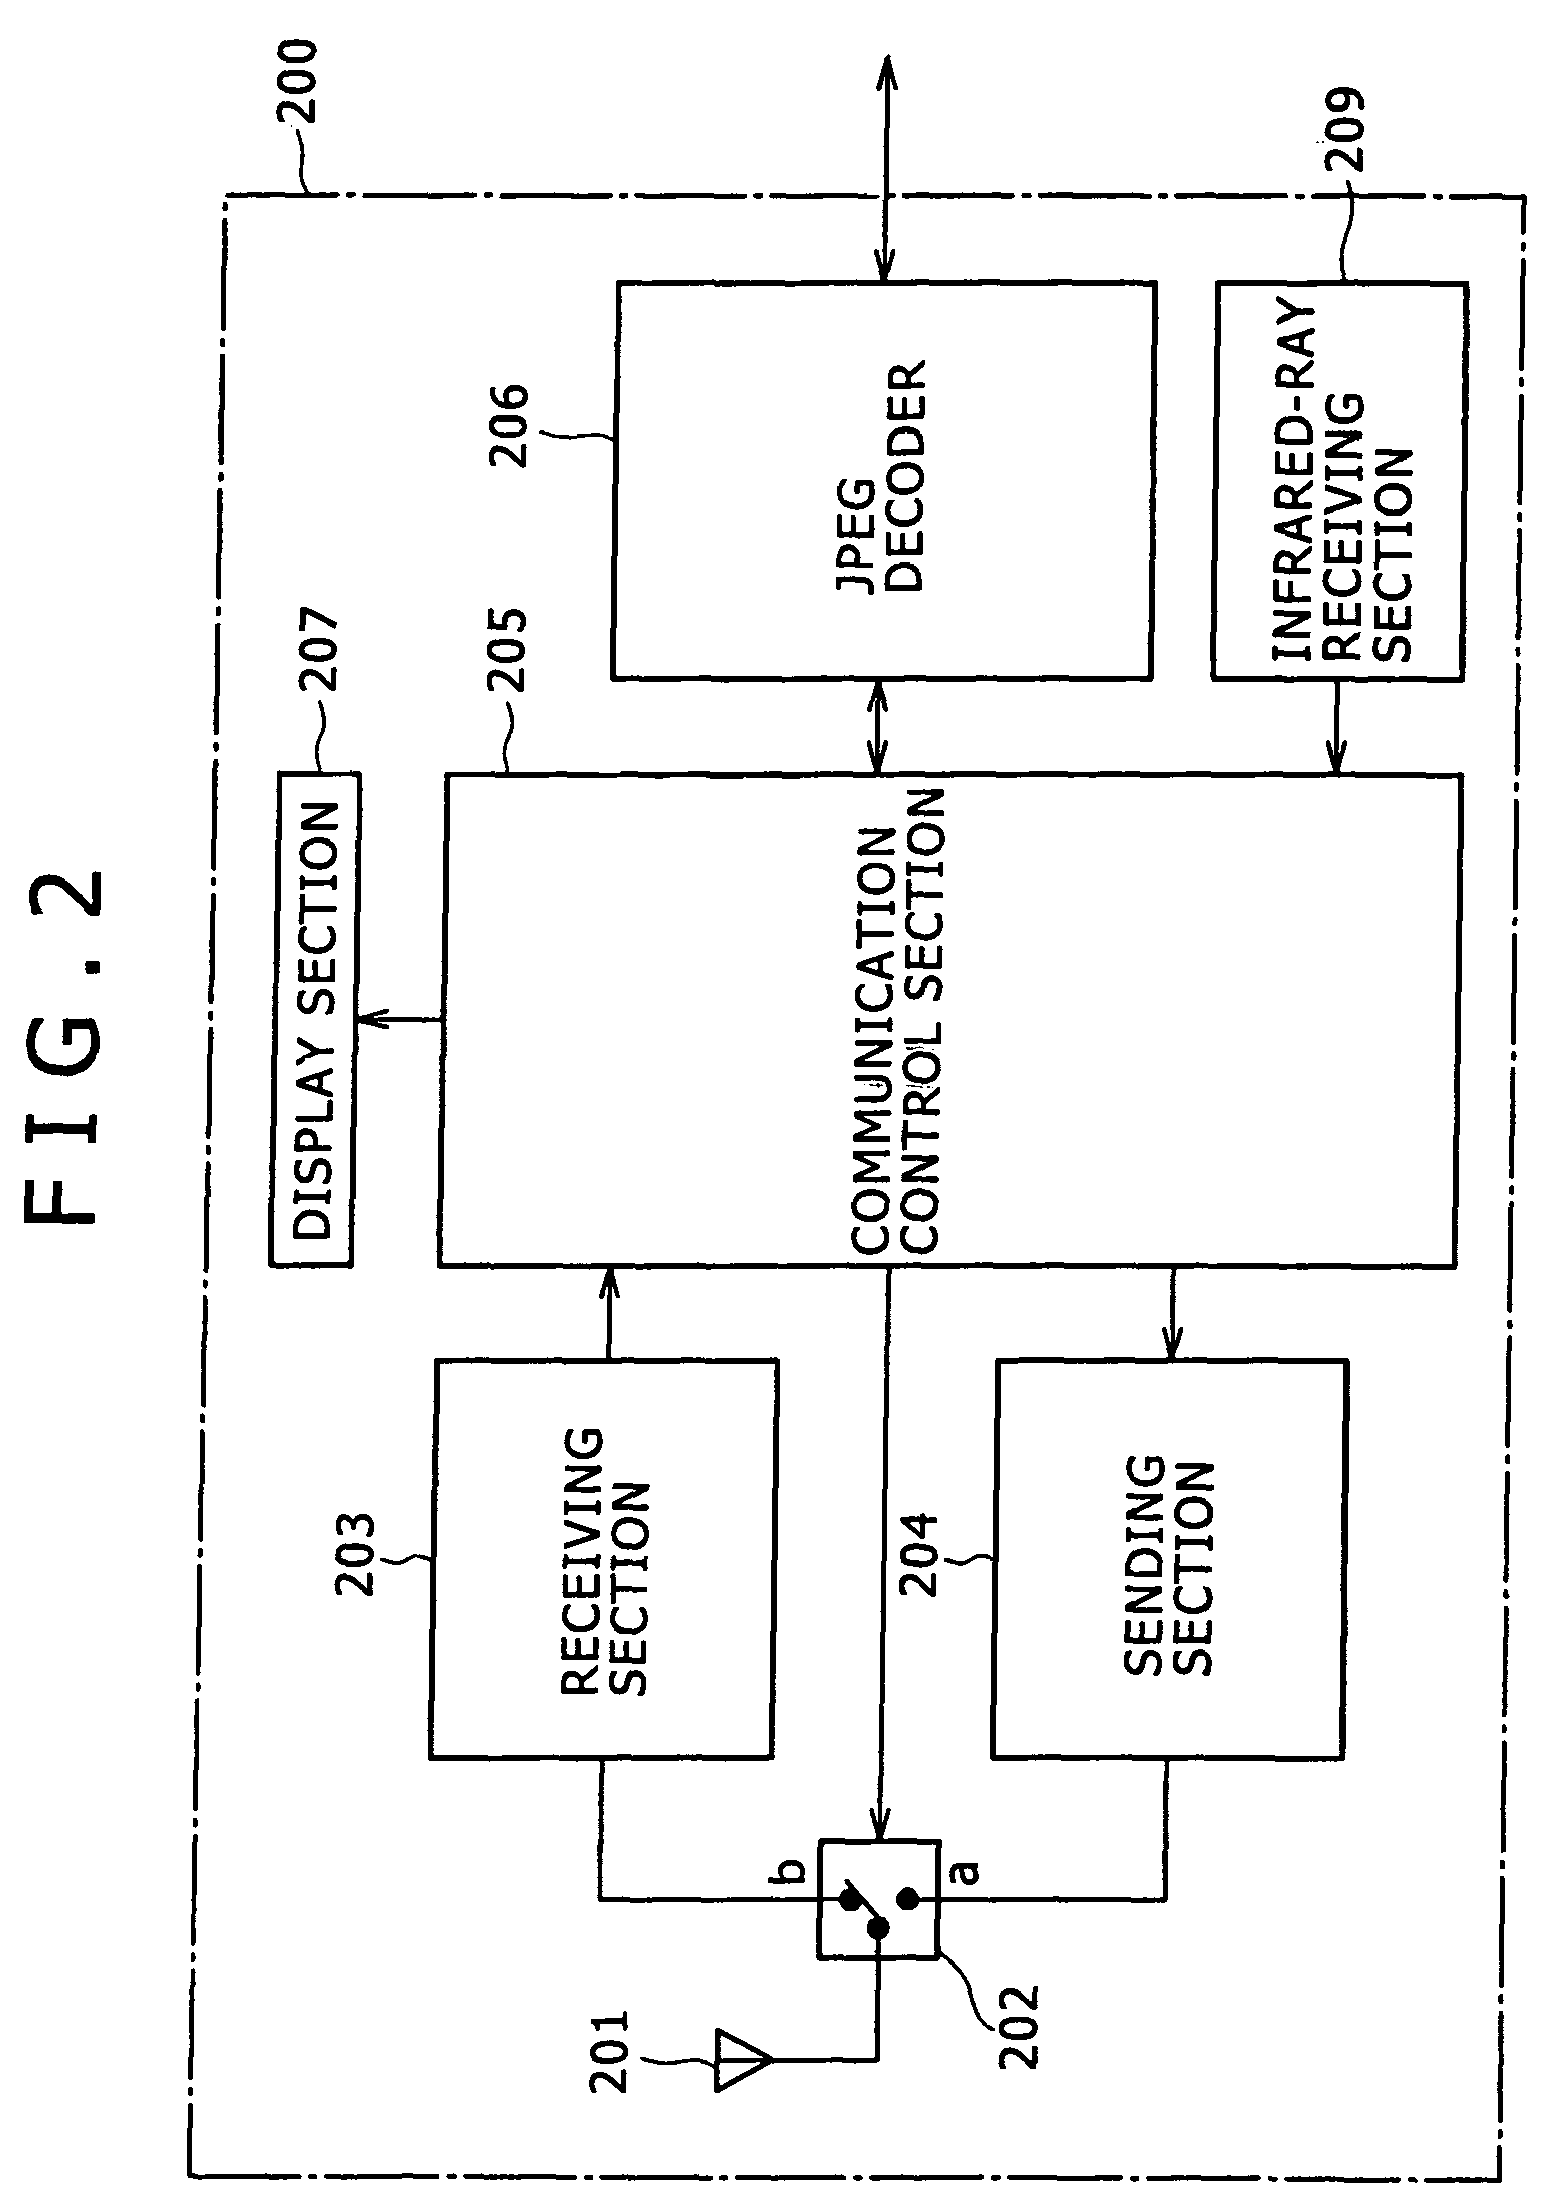 Mountable memory card and method for communicating, controlling, accessing and/or using the same